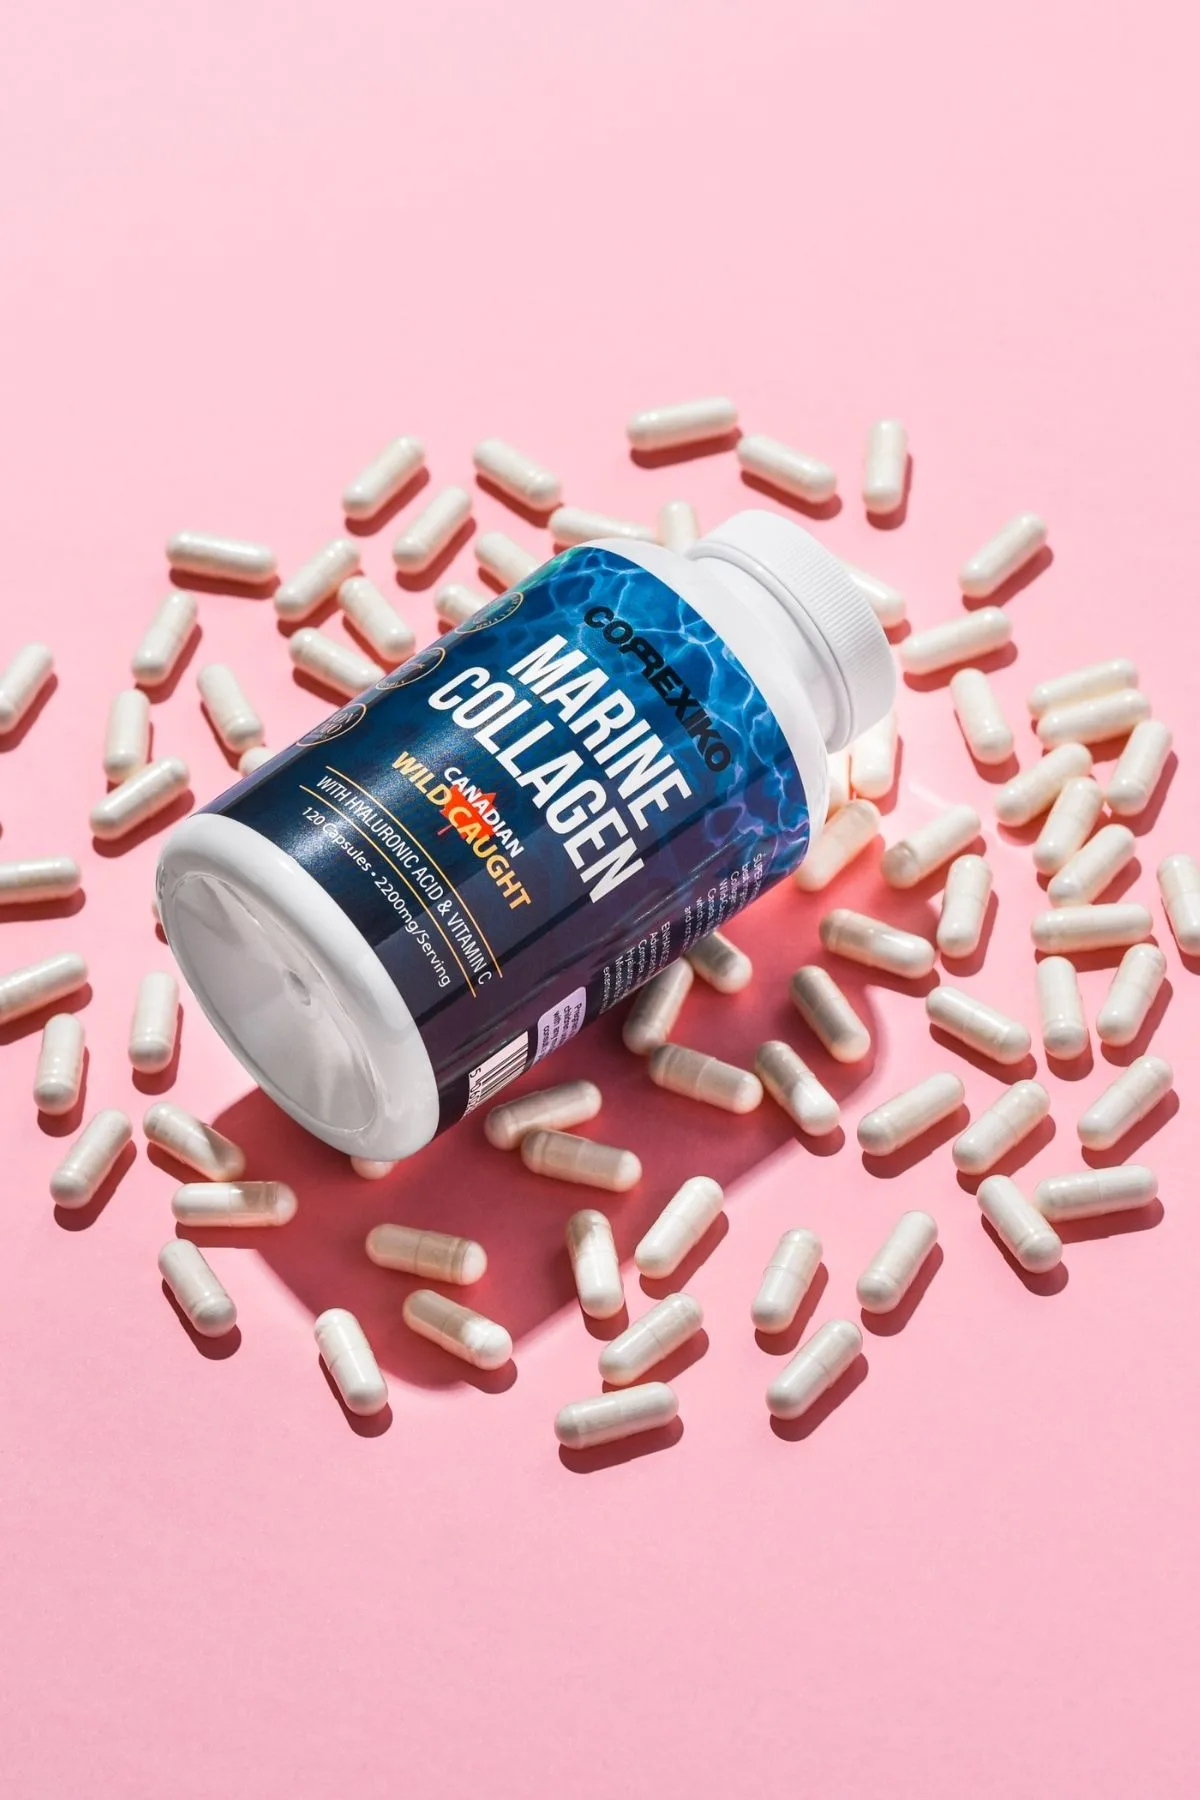 Bottle of marine collagen surrounded by loose collagen pills on pink background.